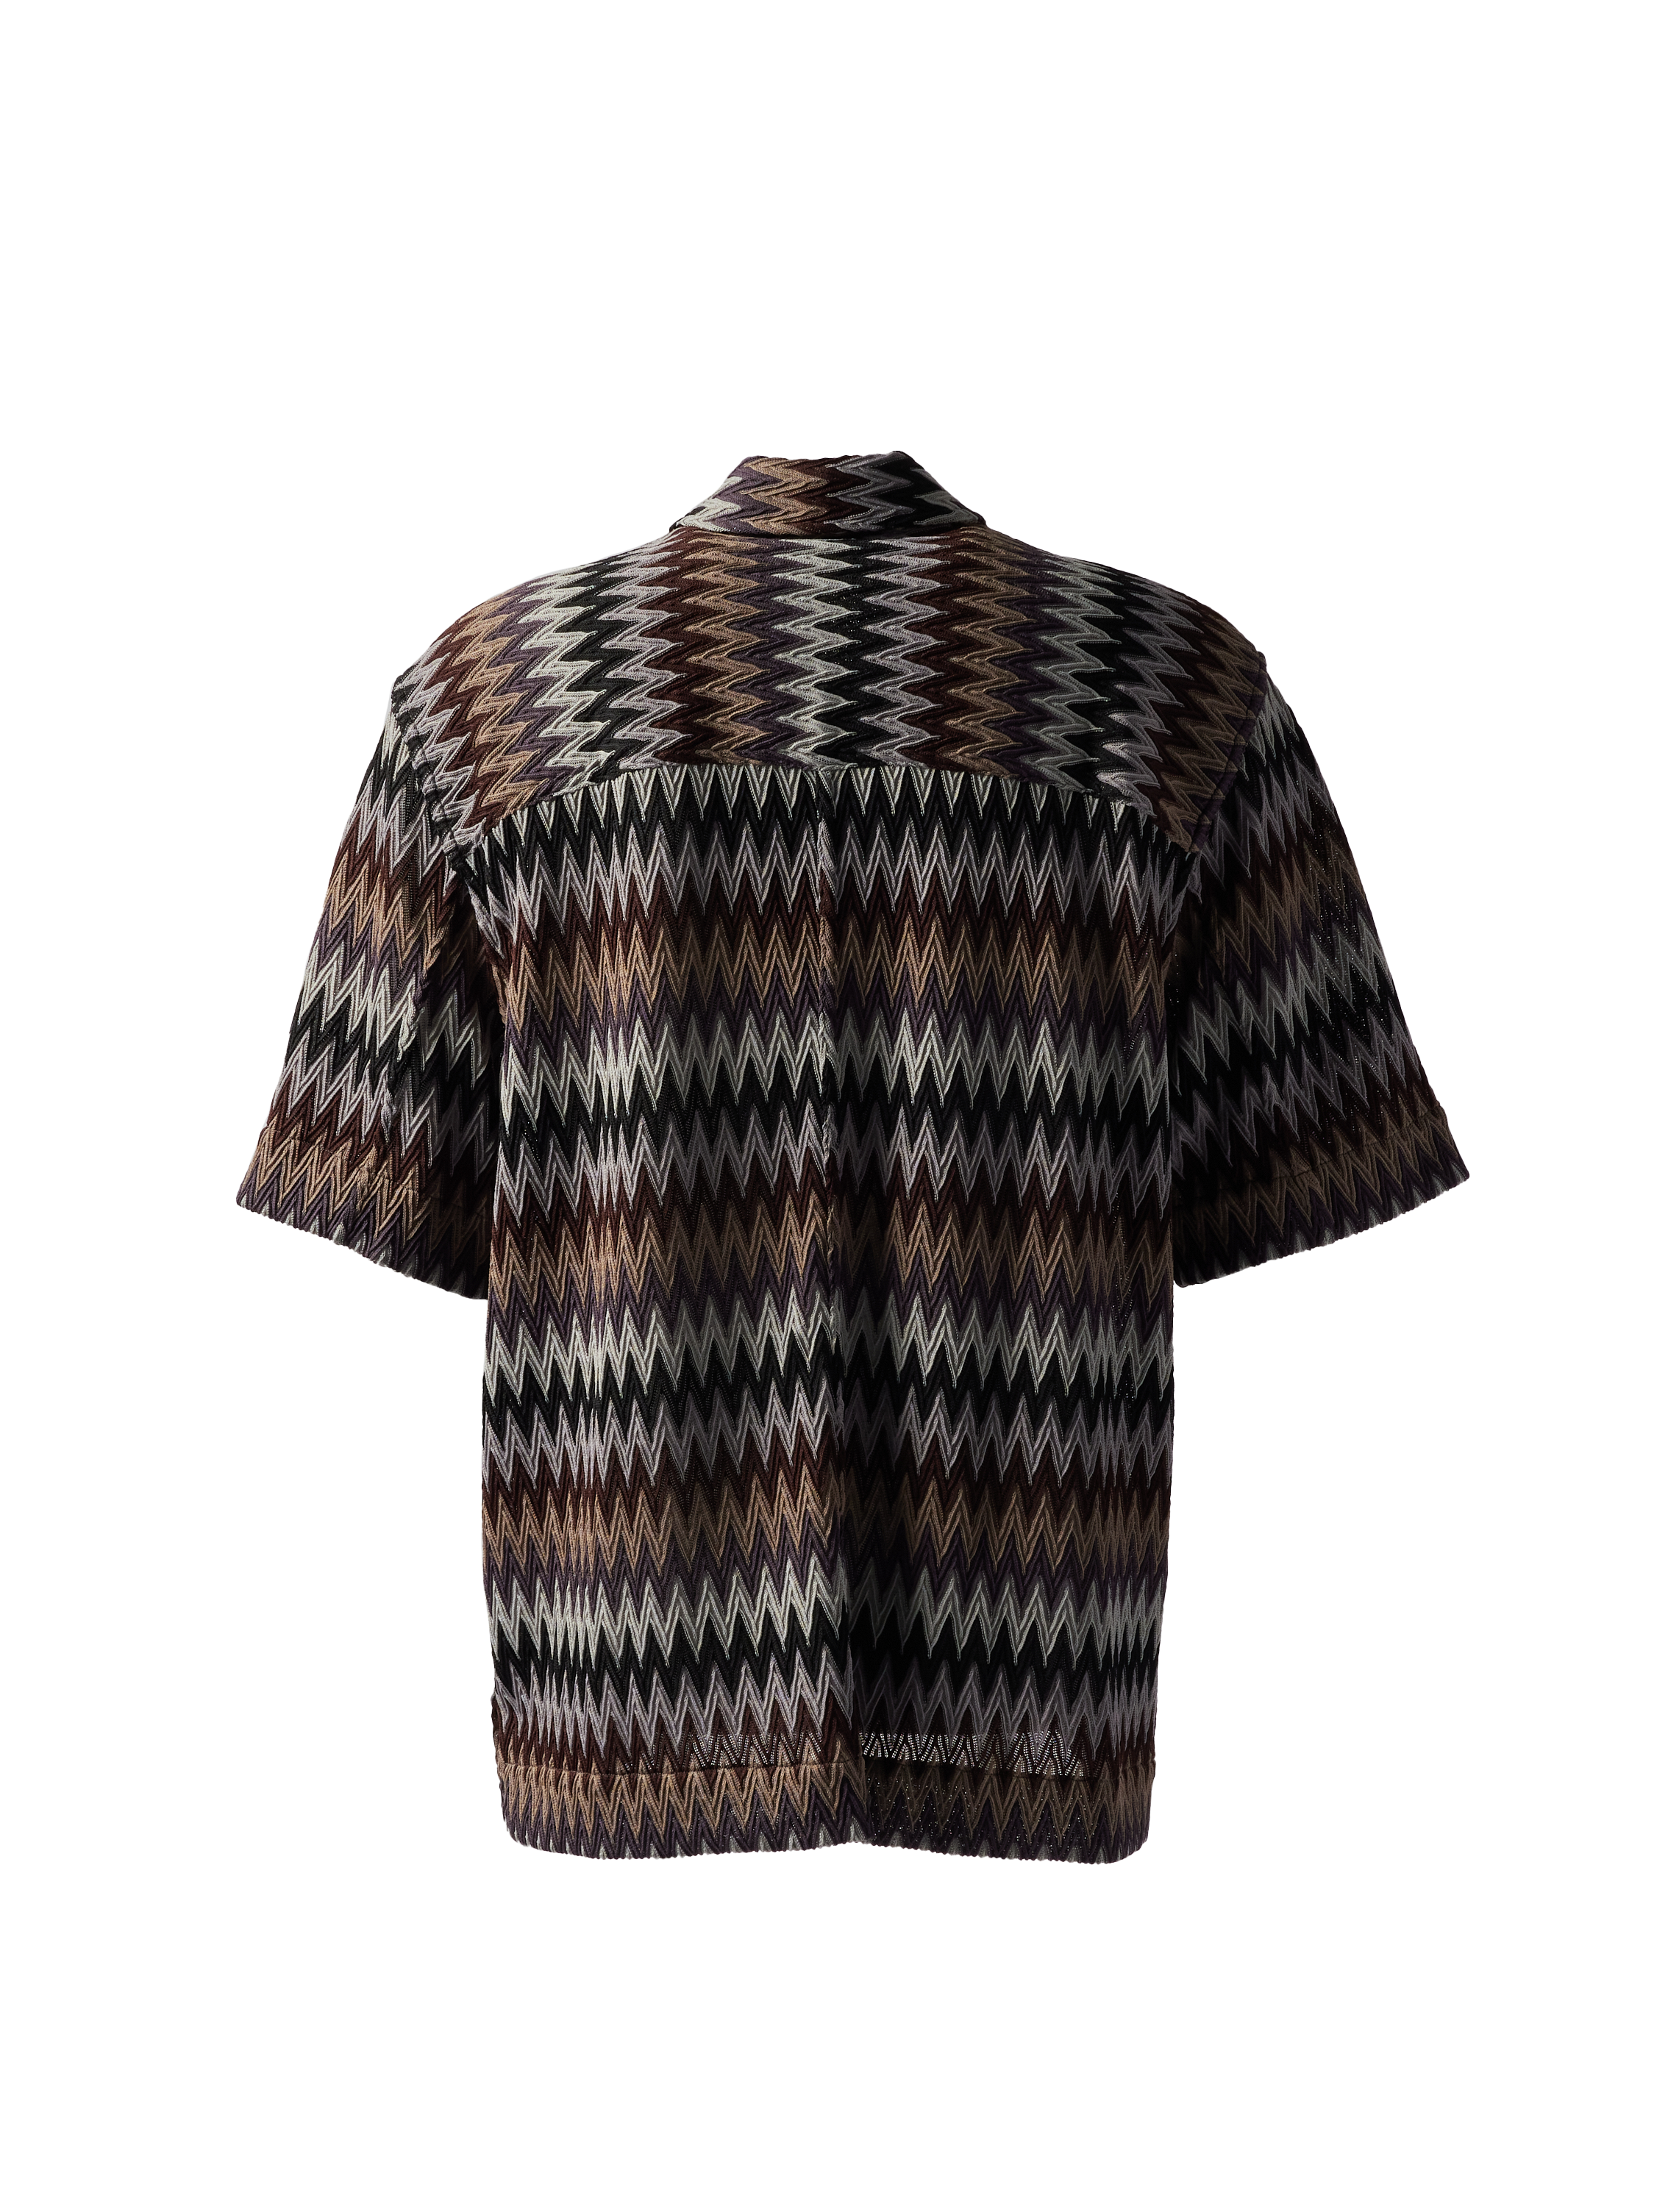 SONG FOR THE MUTE - Zig Zag Box Shirt product image